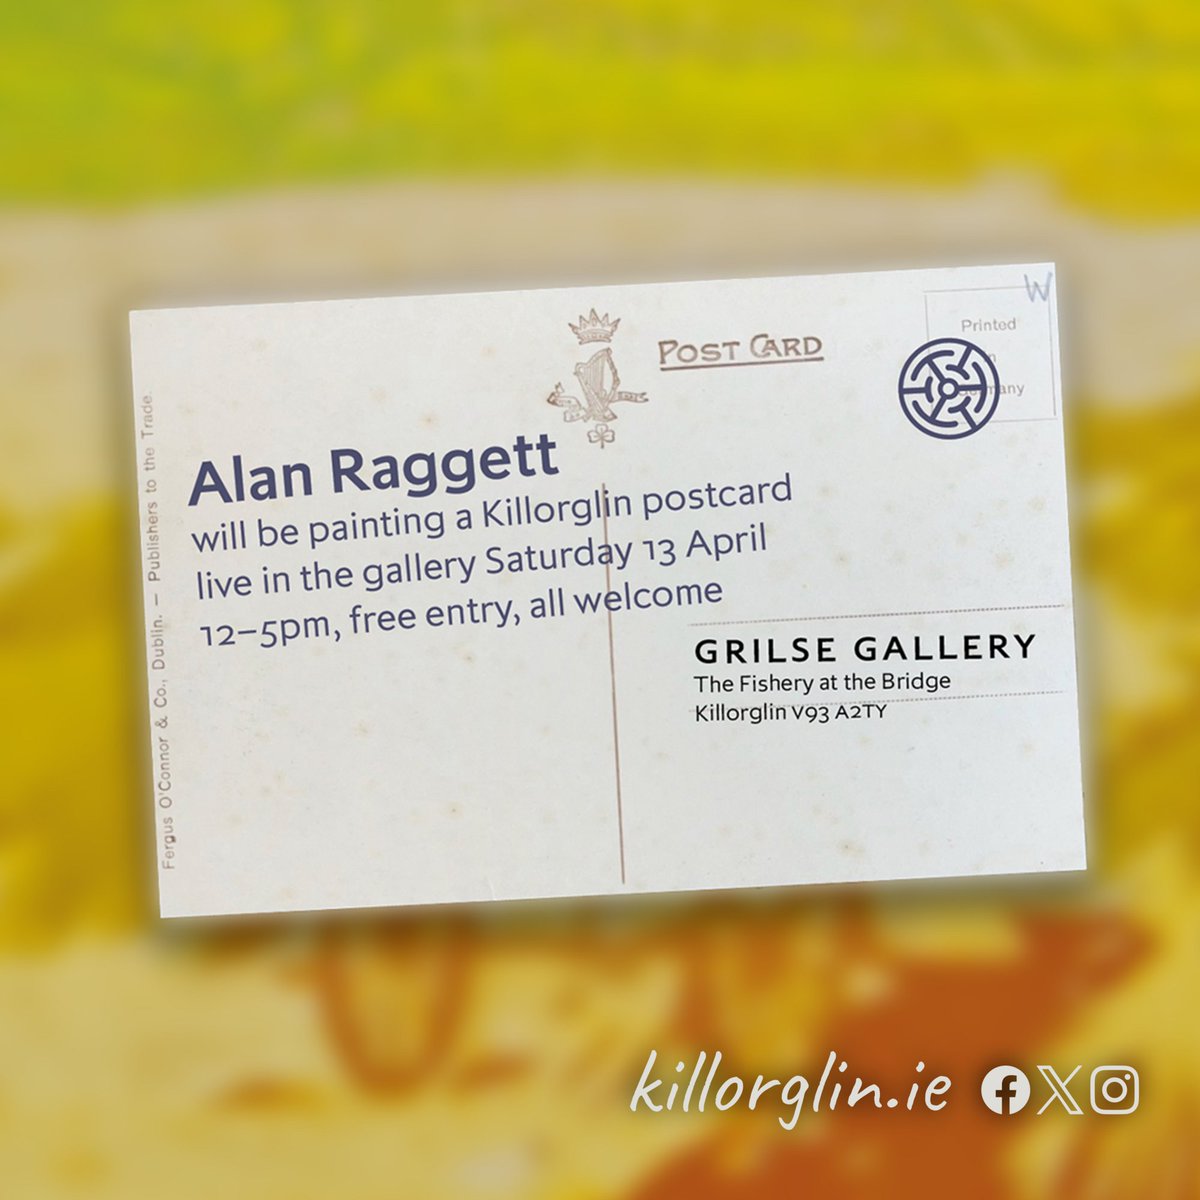 As part of Alan Raggett’s current exhibition of oil paintings of #Kerry landscapes based on vintage postcards, he will be painting a postcard of #Killorglin.

📅 Saturday, April 13
⌚️ noon to 5 pm
📍Grilse Gallery
🎟️ Free

The exhibition runs until April 21

#LivePlayThriveHere